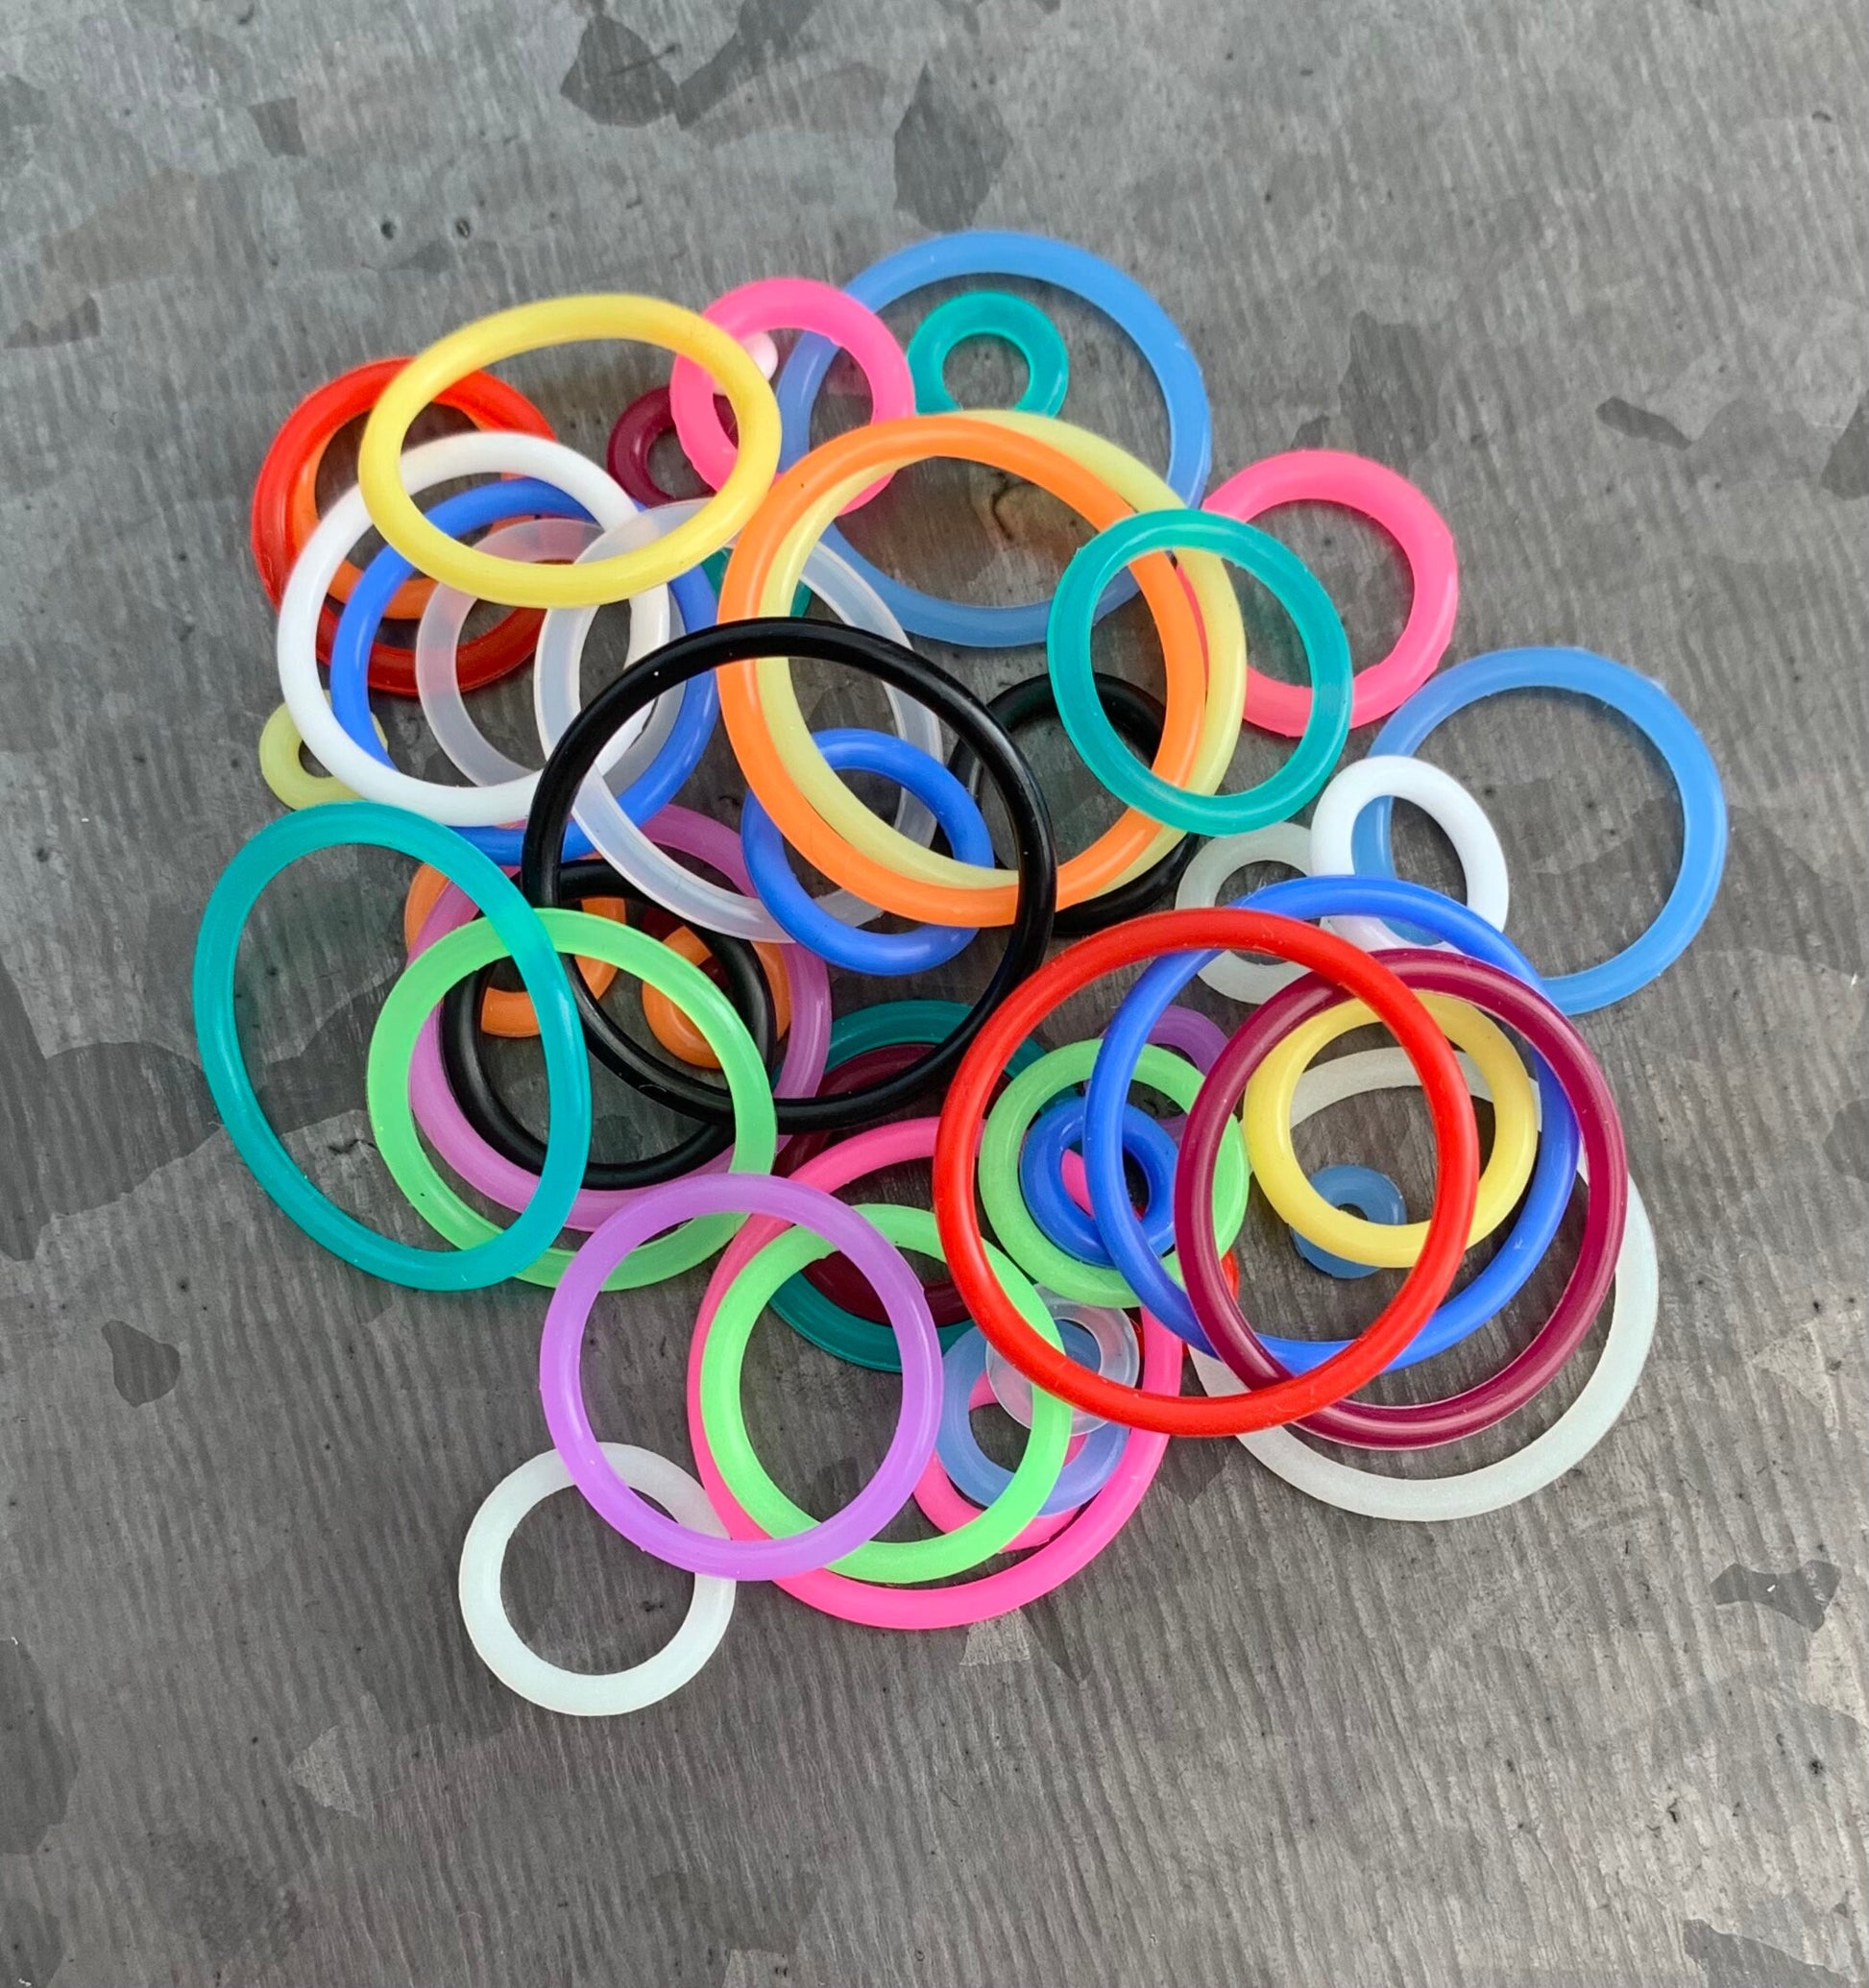 10 pack of Purple Replacement O-Rings Bands for Plugs or Tunnels - 13 more colors available!